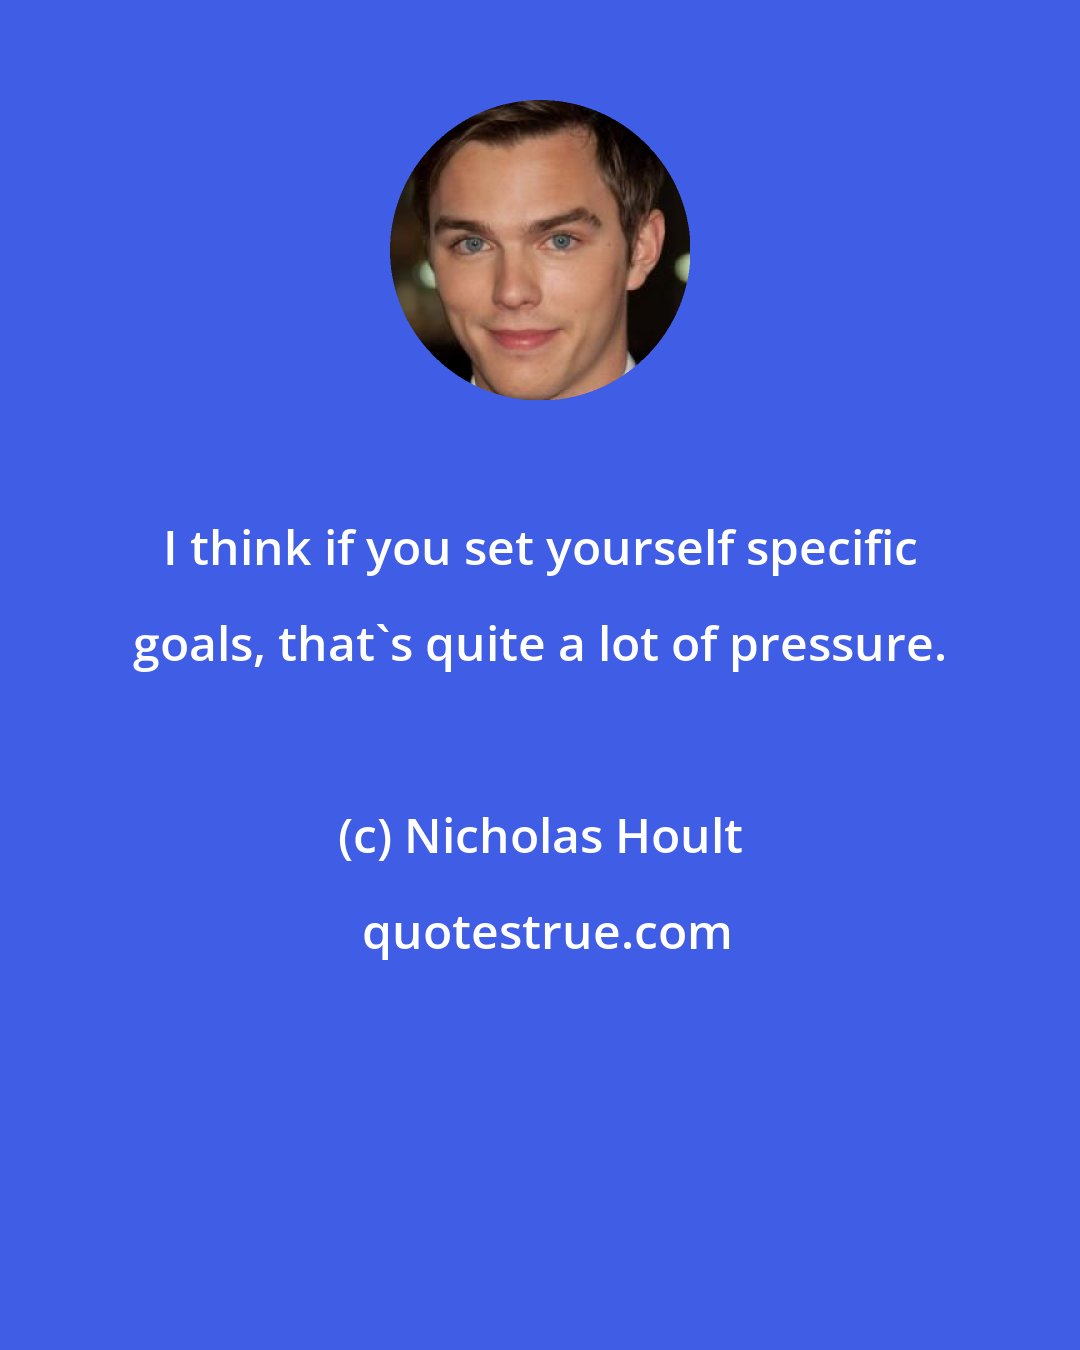 Nicholas Hoult: I think if you set yourself specific goals, that's quite a lot of pressure.